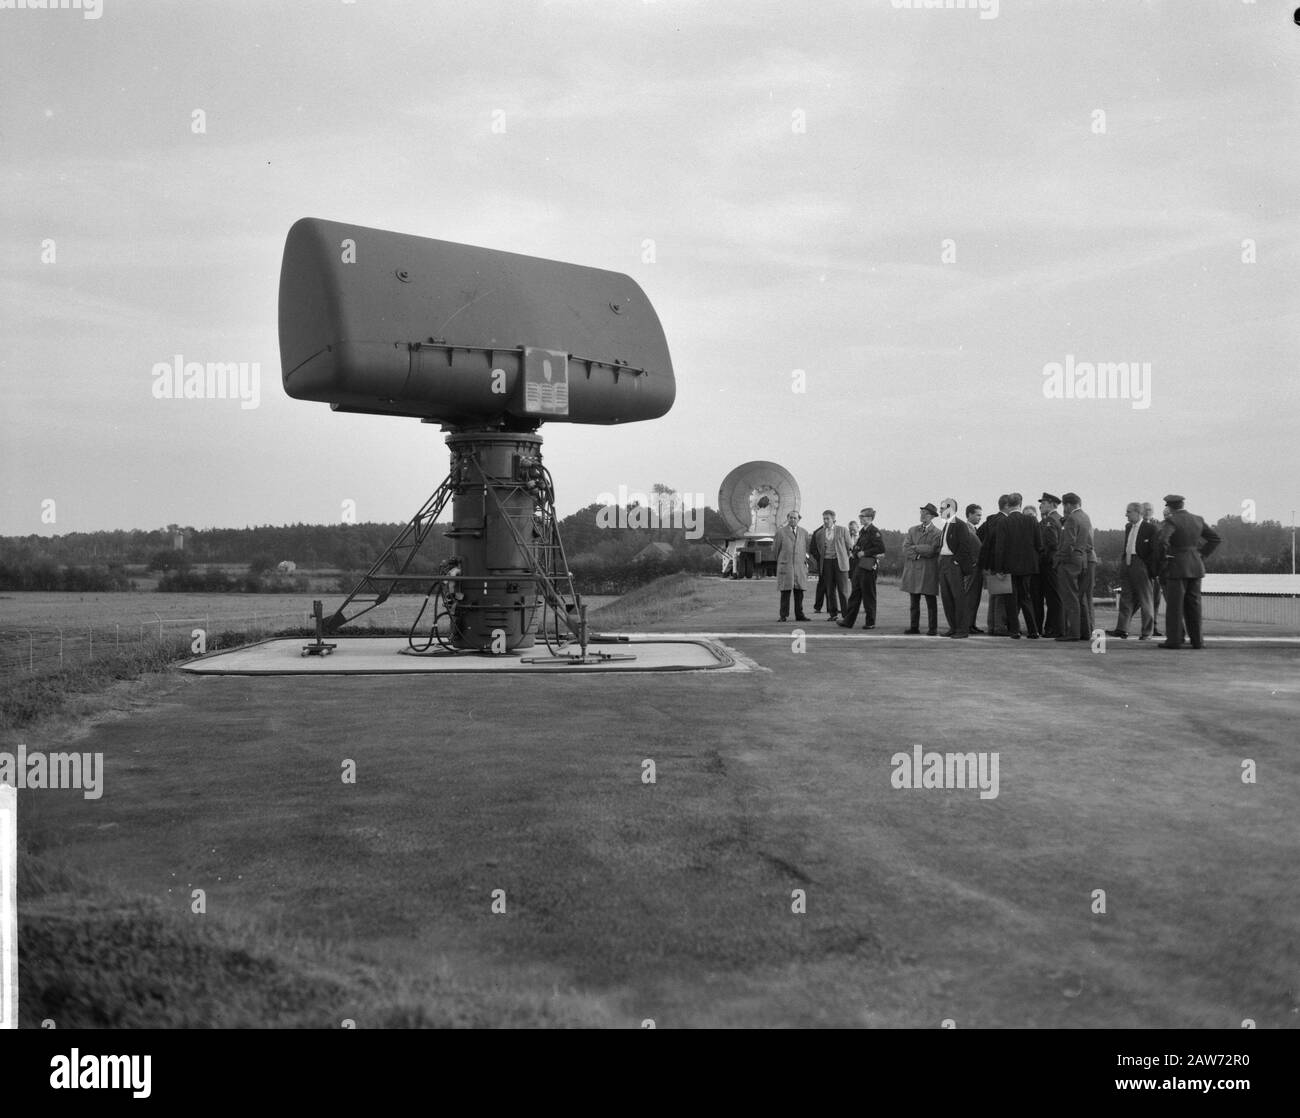 Transfer rocket launch site in Germany. General H. Schaper, Calmeyer by radar. These are the first NIKE Hercules Ant-Aircraft Guided Missile Site 1 Group Guided Weapons in Handorf. Date: October 10, 1961 Location: Germany Keywords: launch sites, transfers, radars, missiles Person Name: Calmeyer Stock Photo